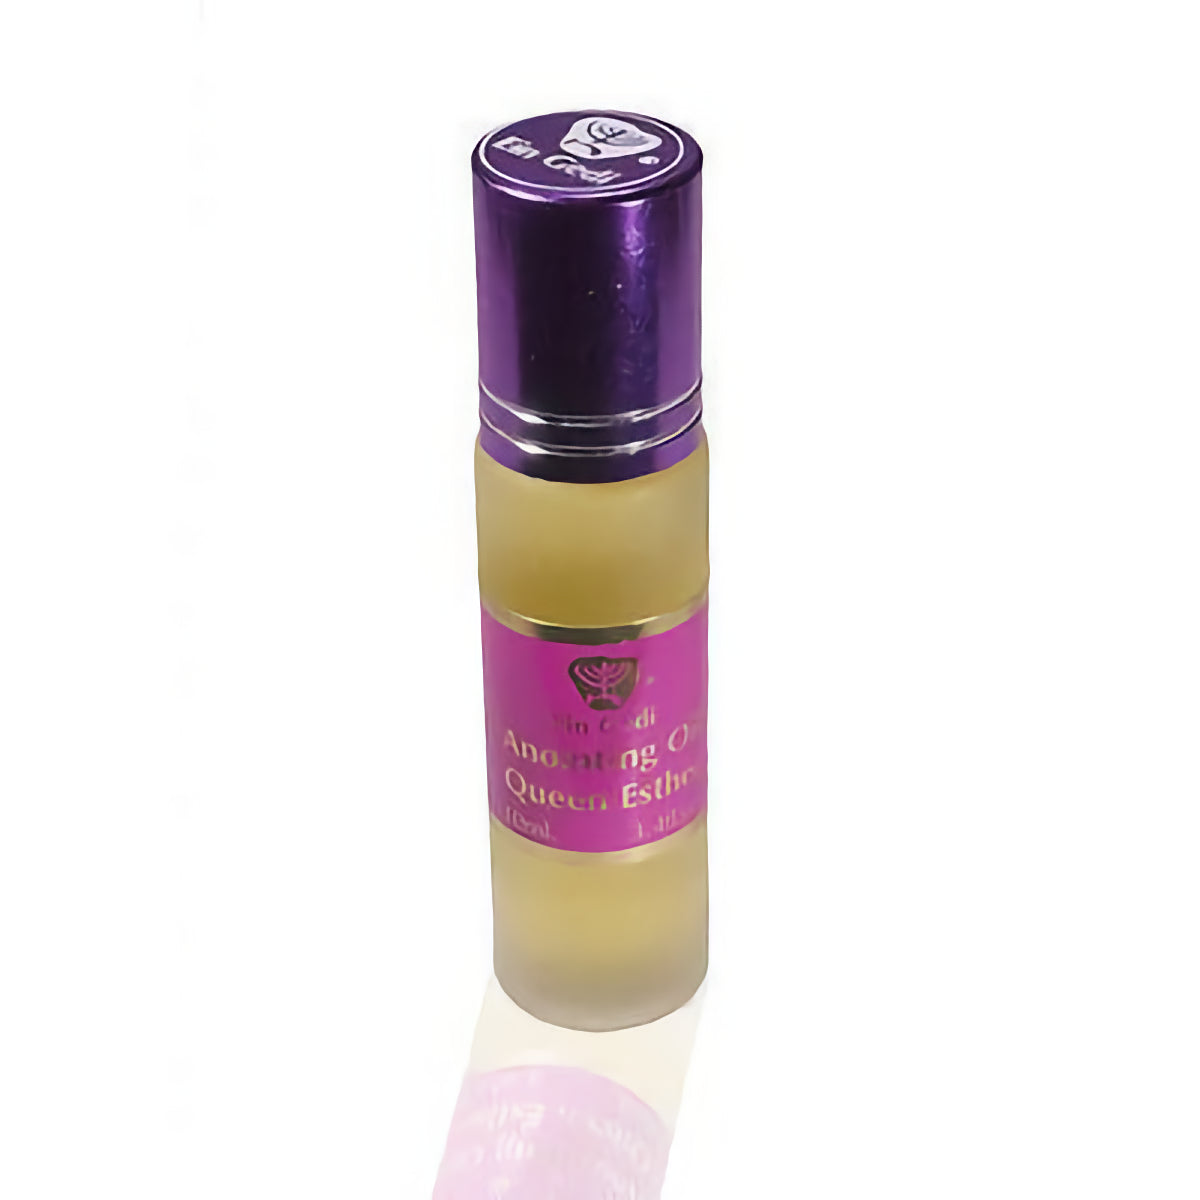 Roll On Anointing Oil Queen Esther 10 ml. - 0.34 fl.oz From Holyland Jerusalem